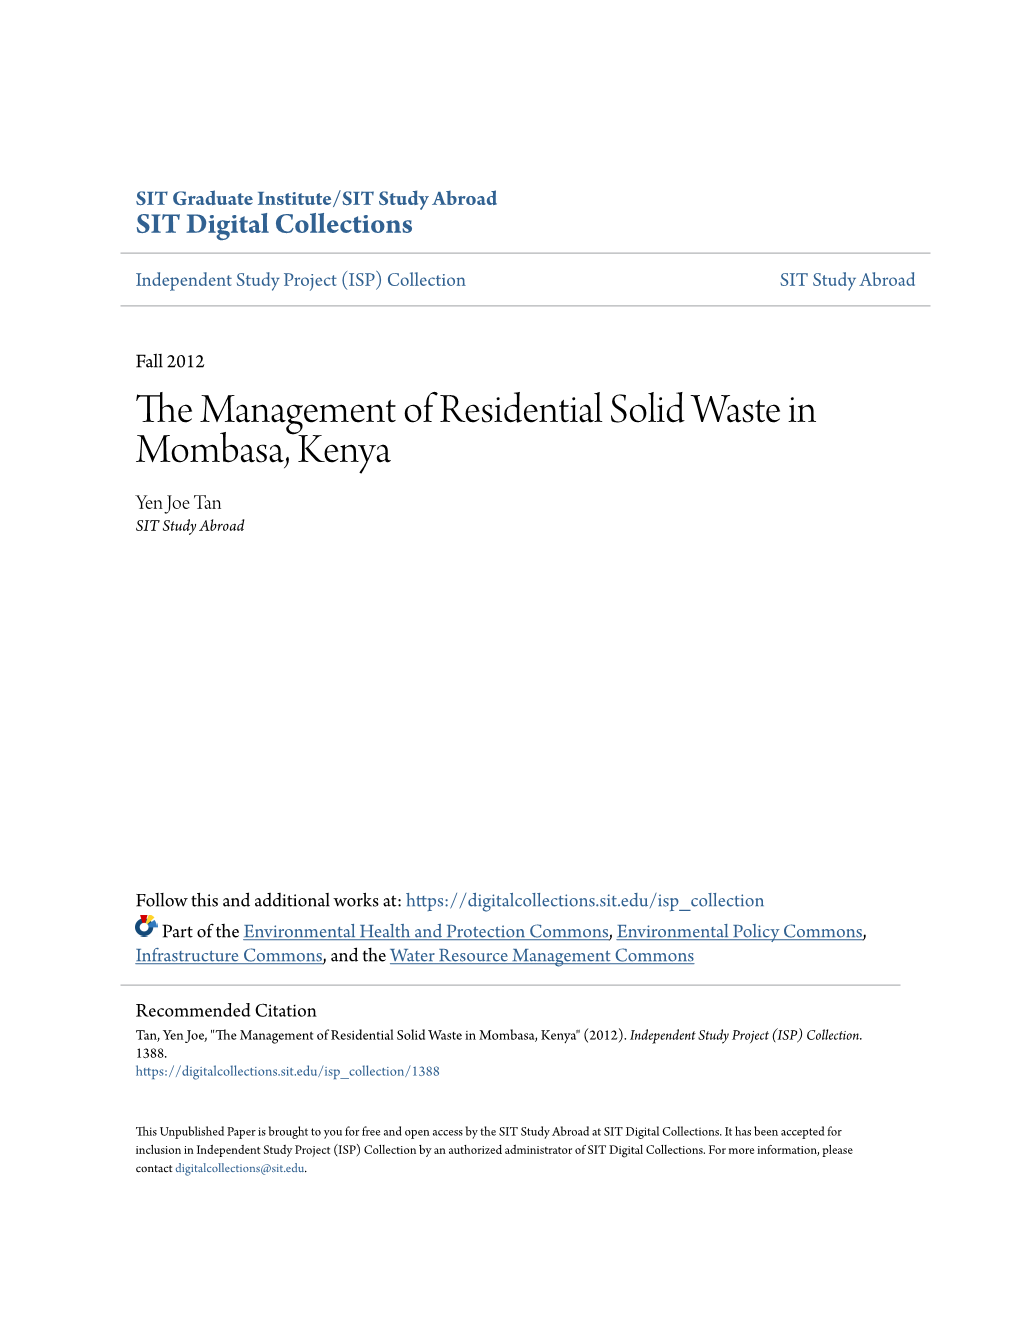 The Management of Residential Solid Waste in Mombasa, Kenya